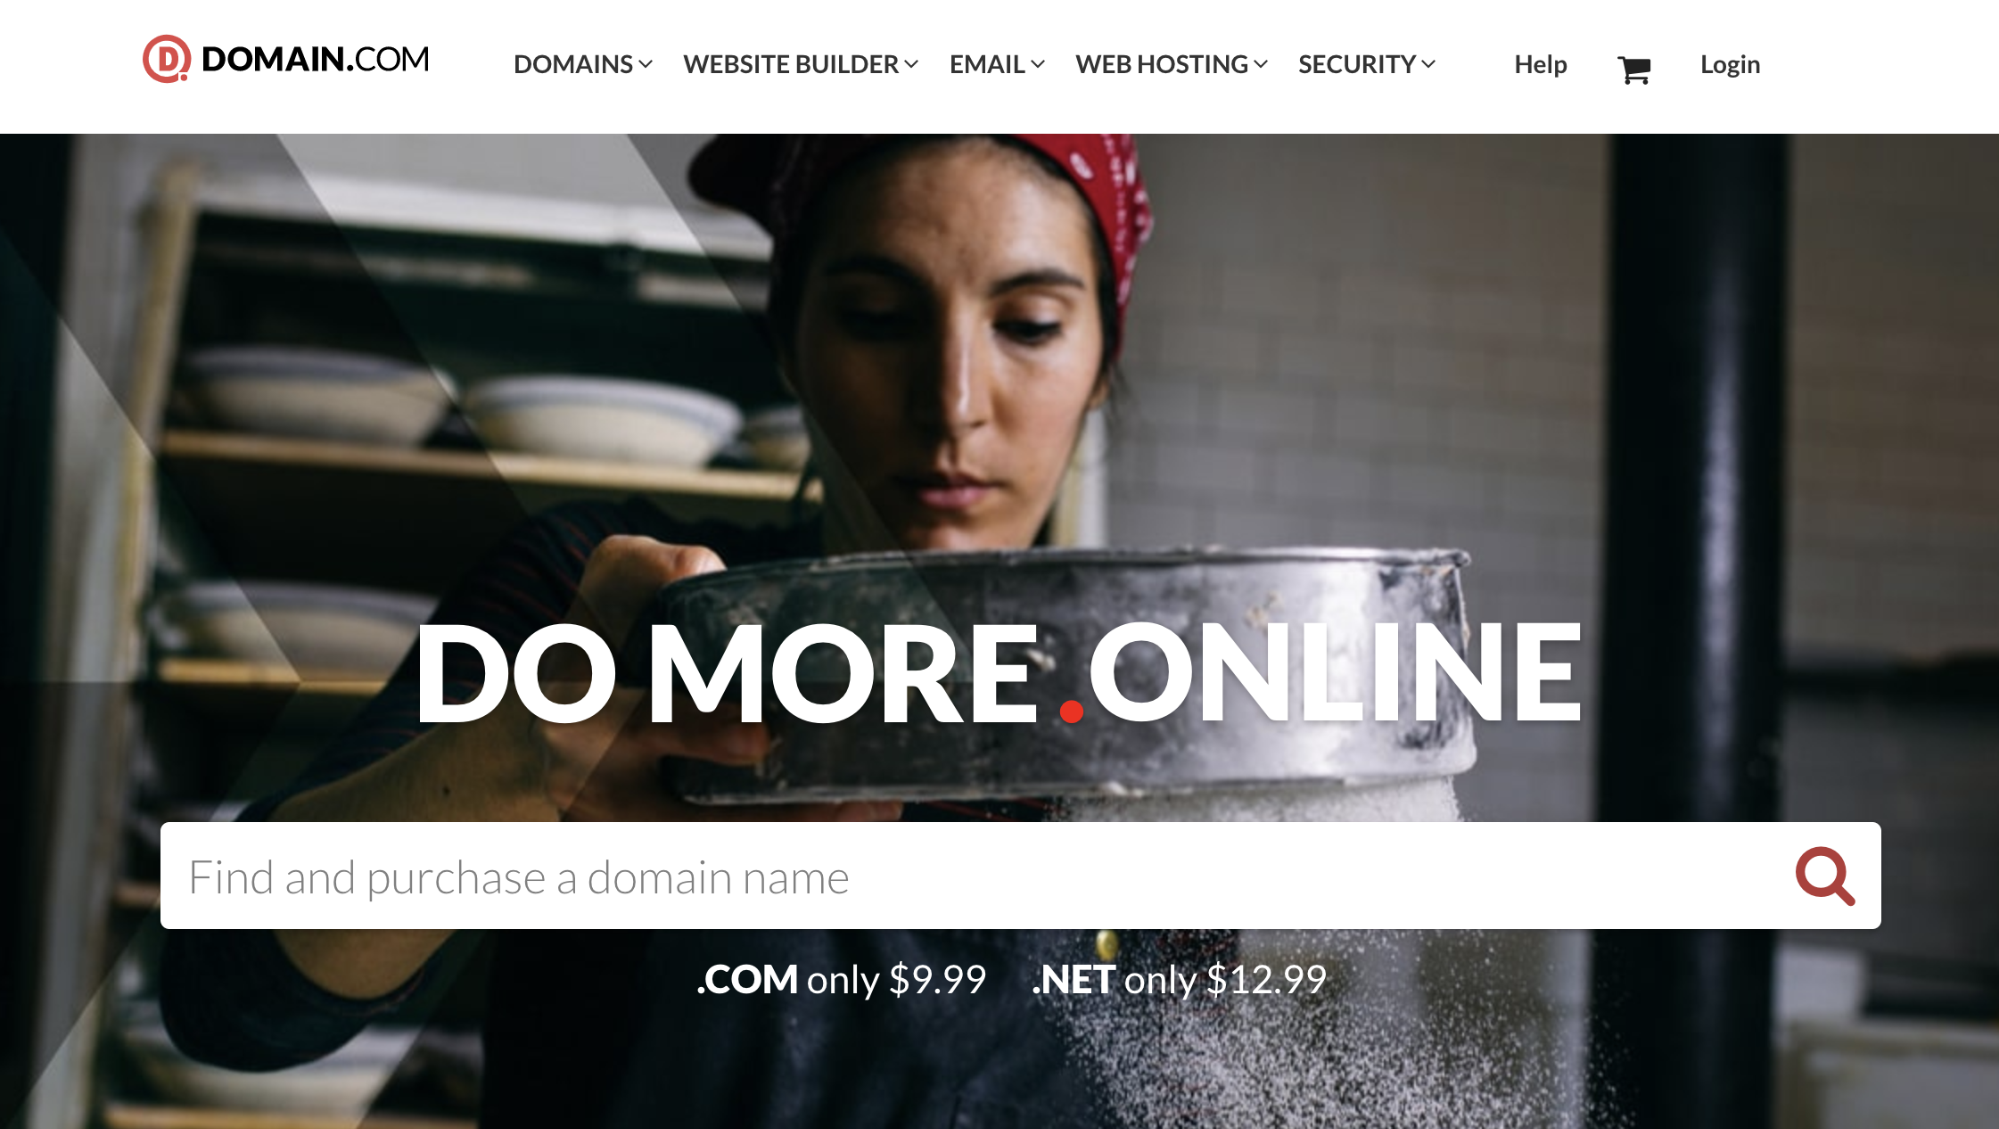 domain.com homepage showing a cook with a red bandana stirring a pot